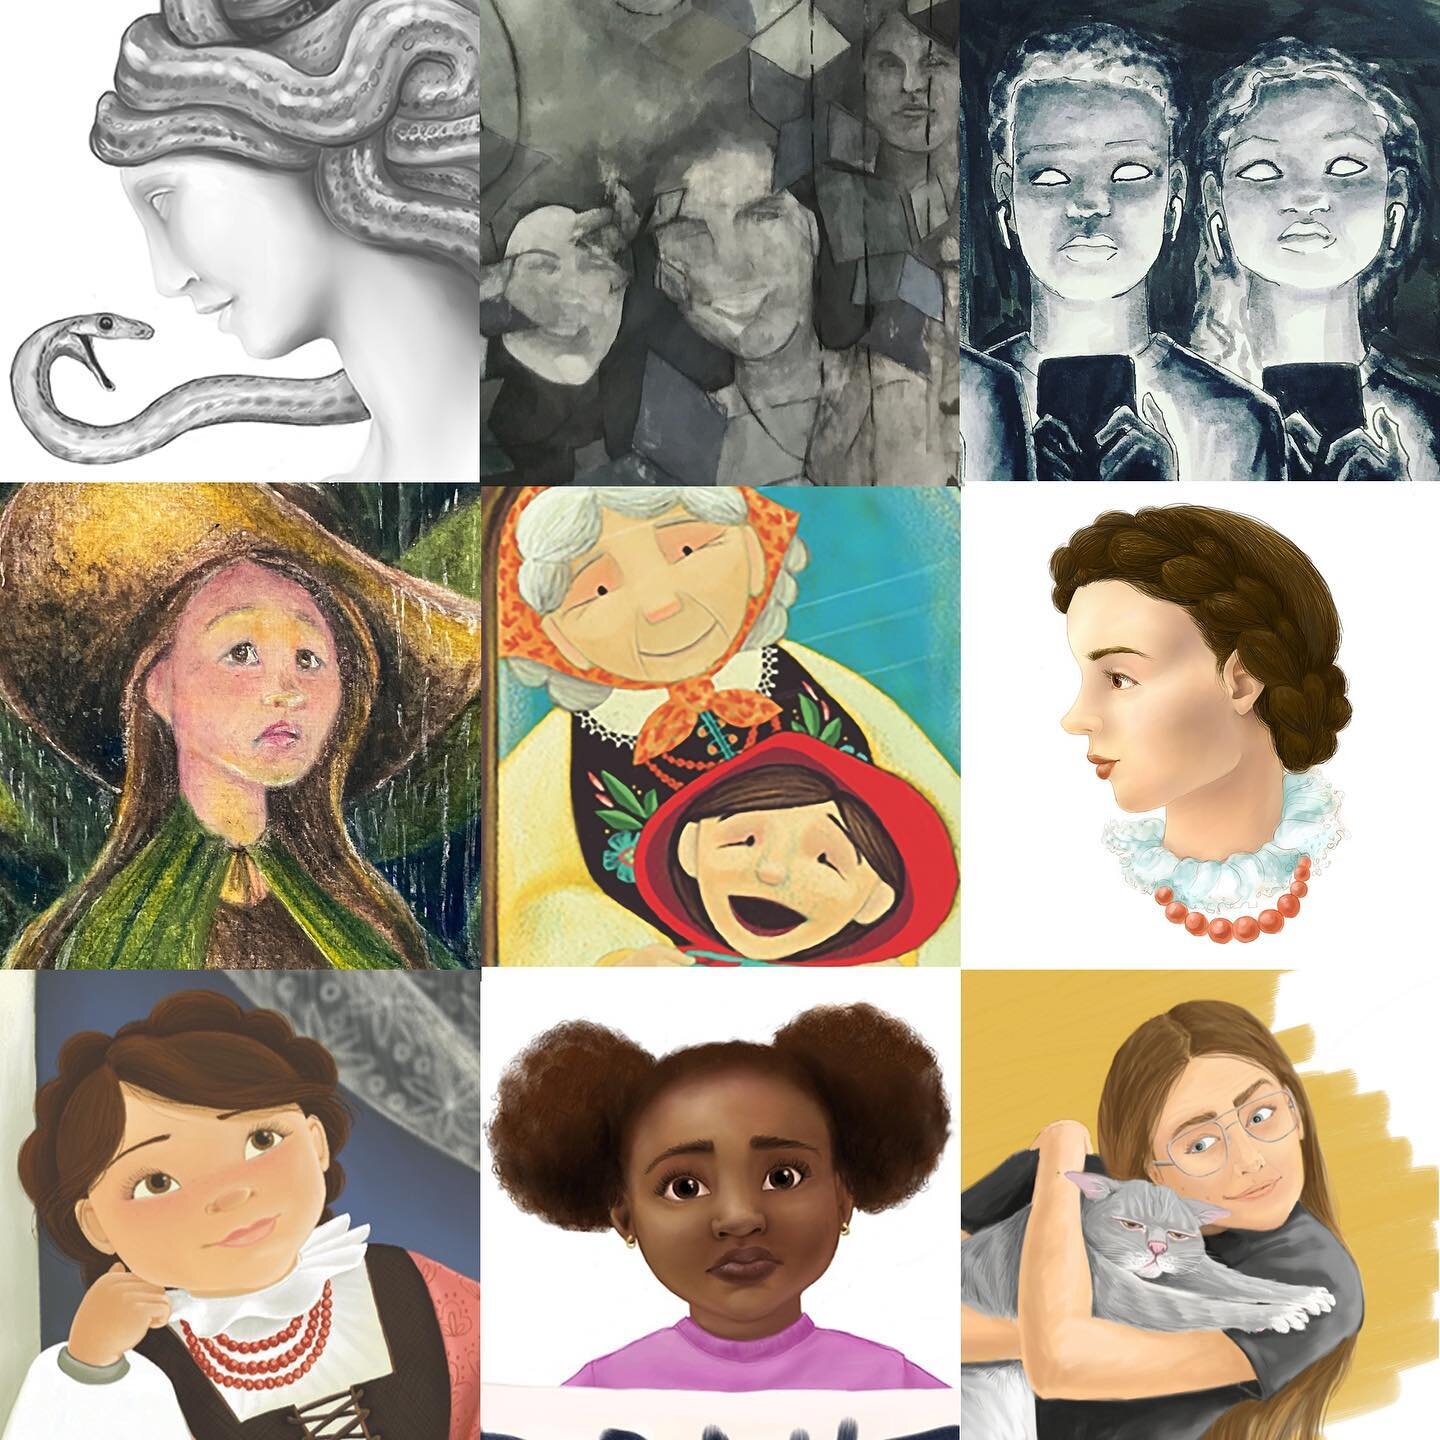 Human faces ...I DEFINITELY need to complete more human drawings 😬 I tell my students to &lsquo;talk less and draw more&rsquo;. Maybe time to do as I say.... #faceyourart2020 #illustration #childrensbookillustration #kidlitillustrator #faces #drawmo